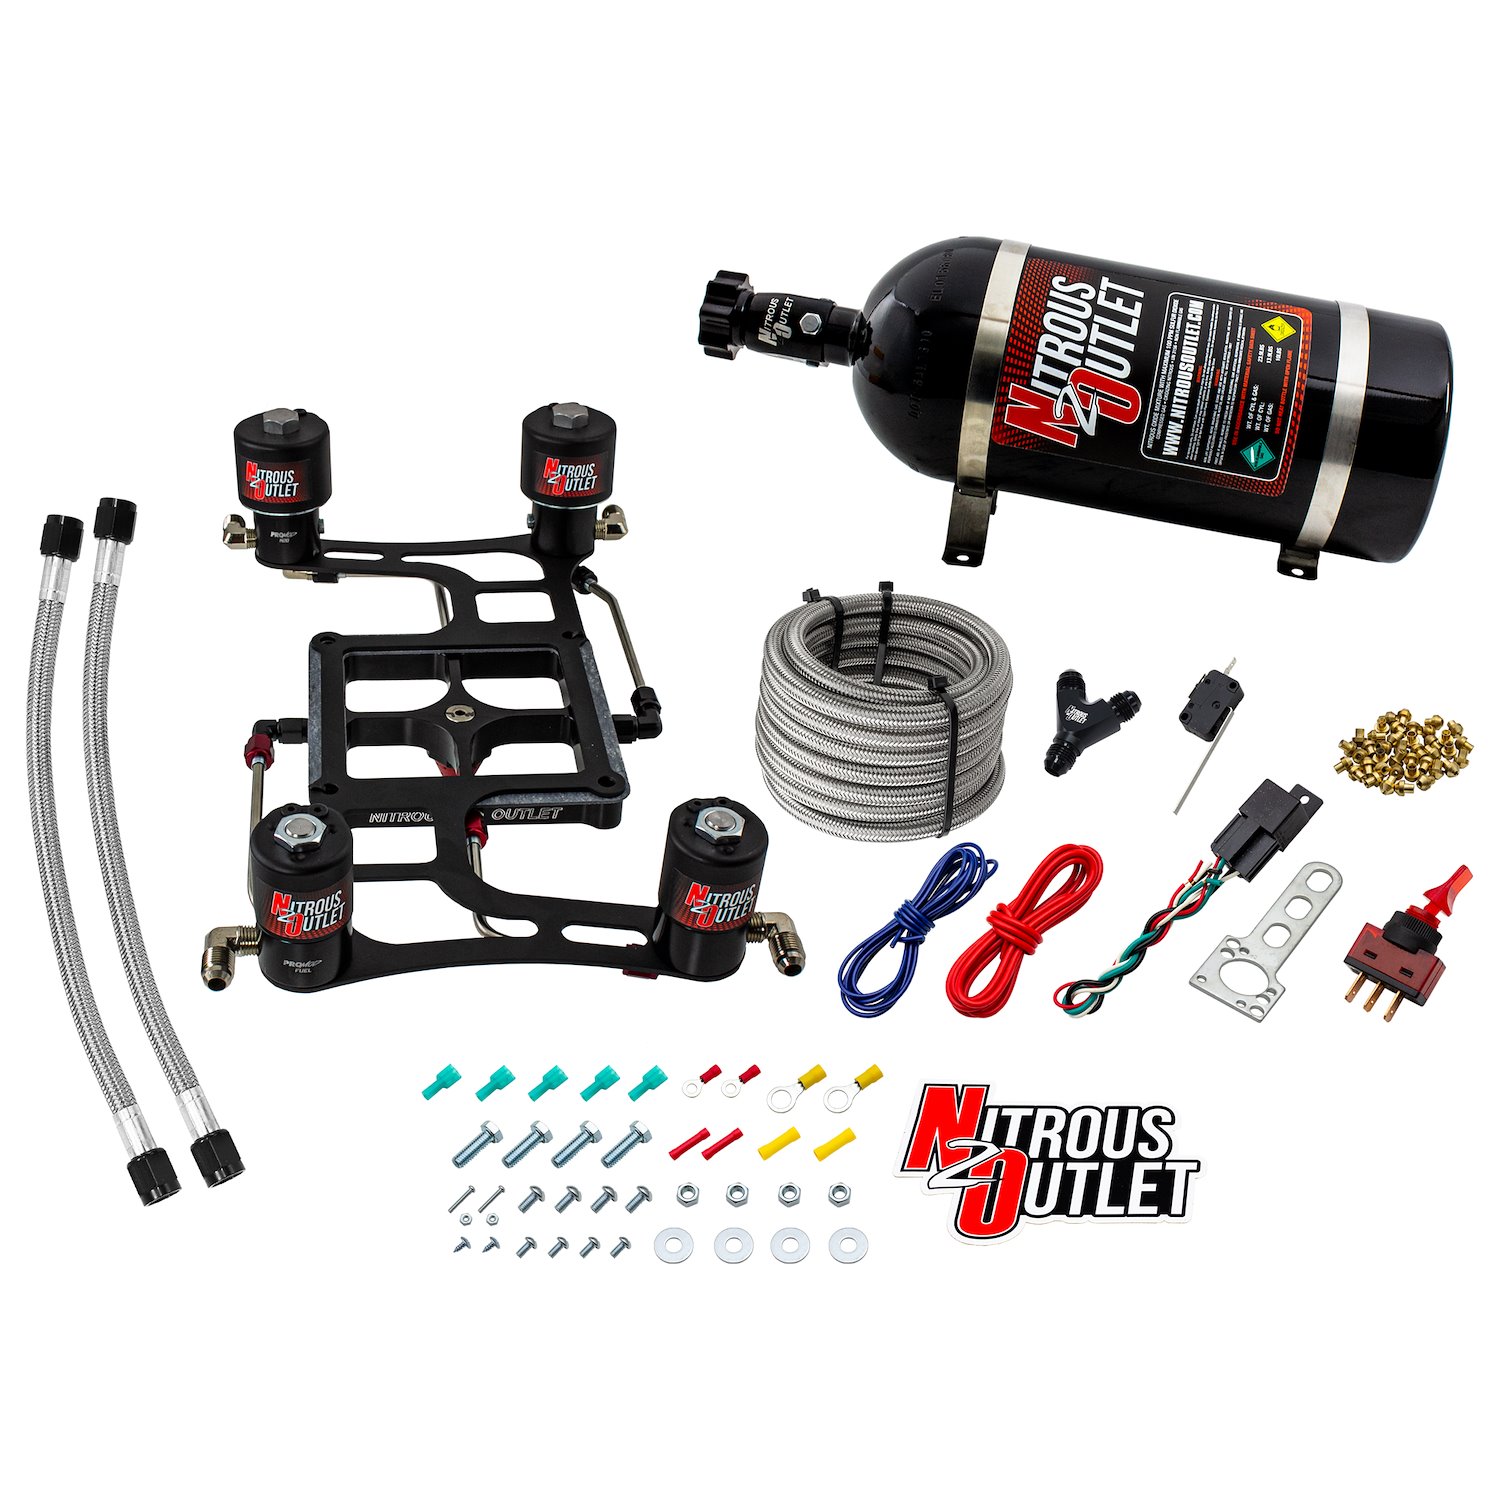 00-10640-10 4500 Hornet 2 Race Dual-Stage System, Hard-Line